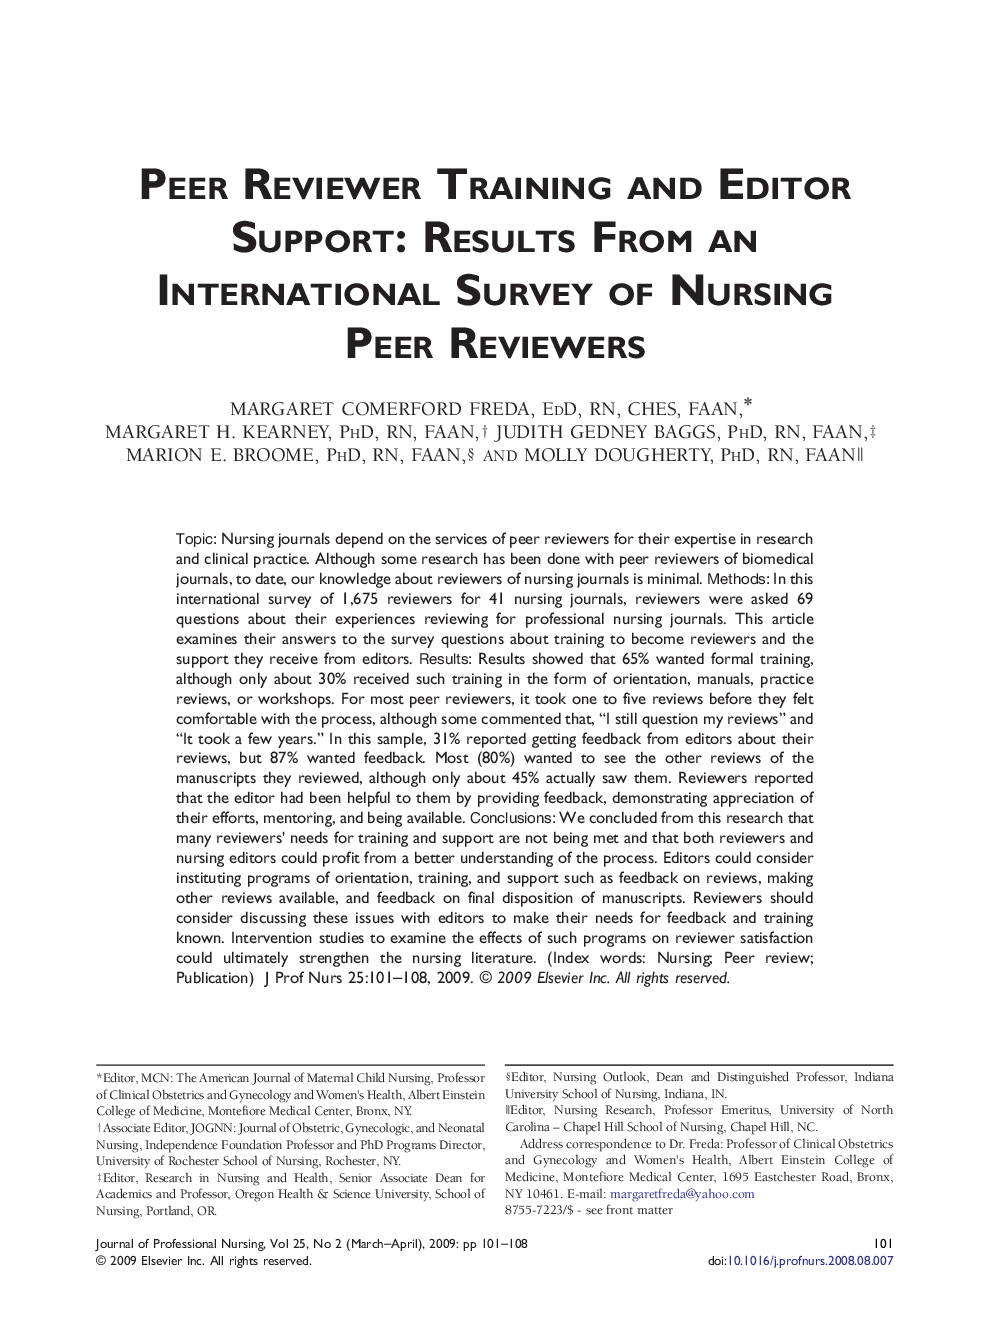 Peer Reviewer Training and Editor Support: Results From an International Survey of Nursing Peer Reviewers